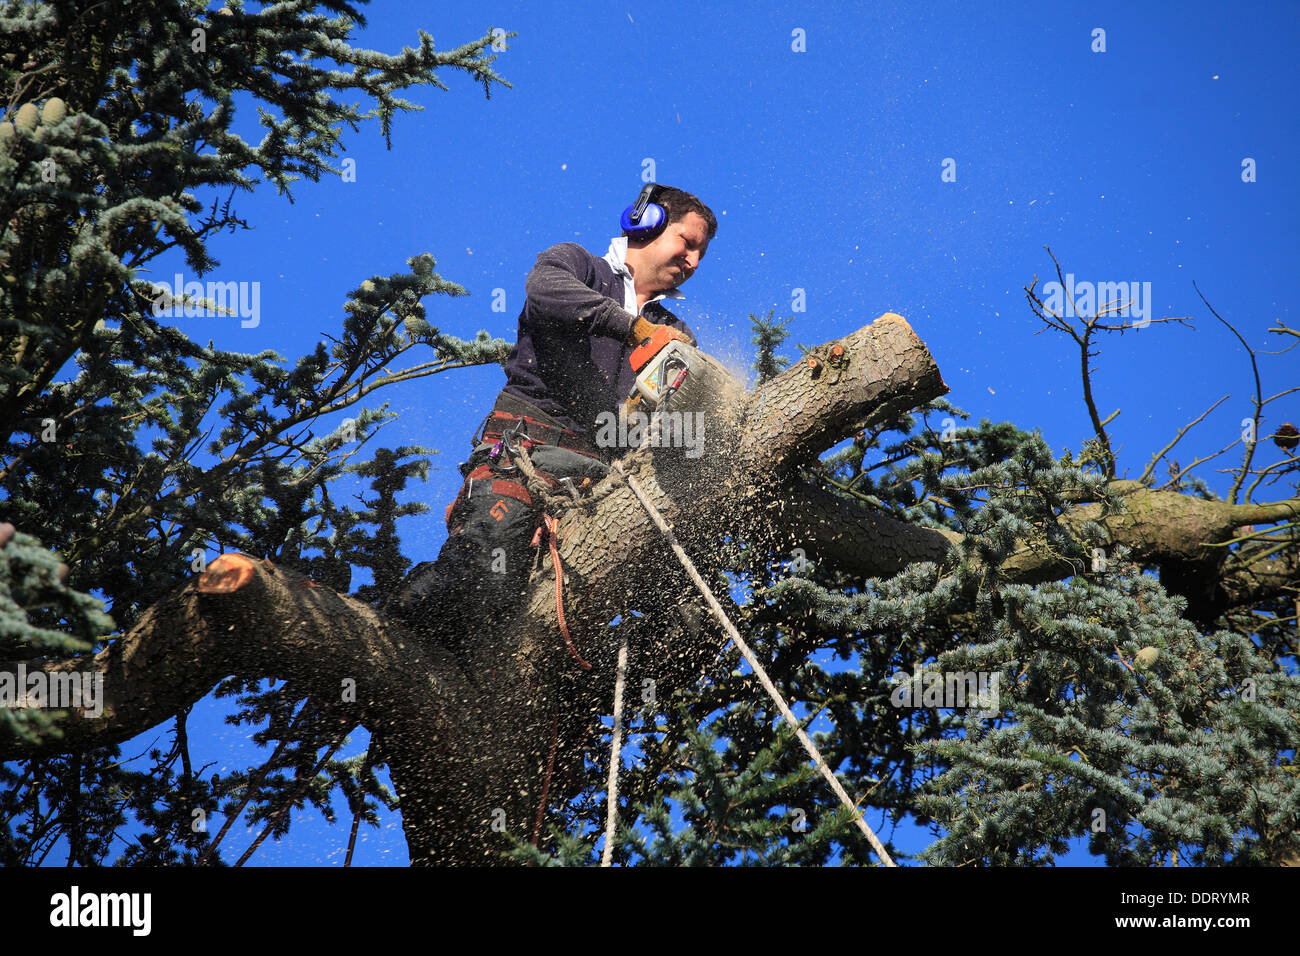 Operator sawing broken branches at top of a Cedar Tree Stock Photo